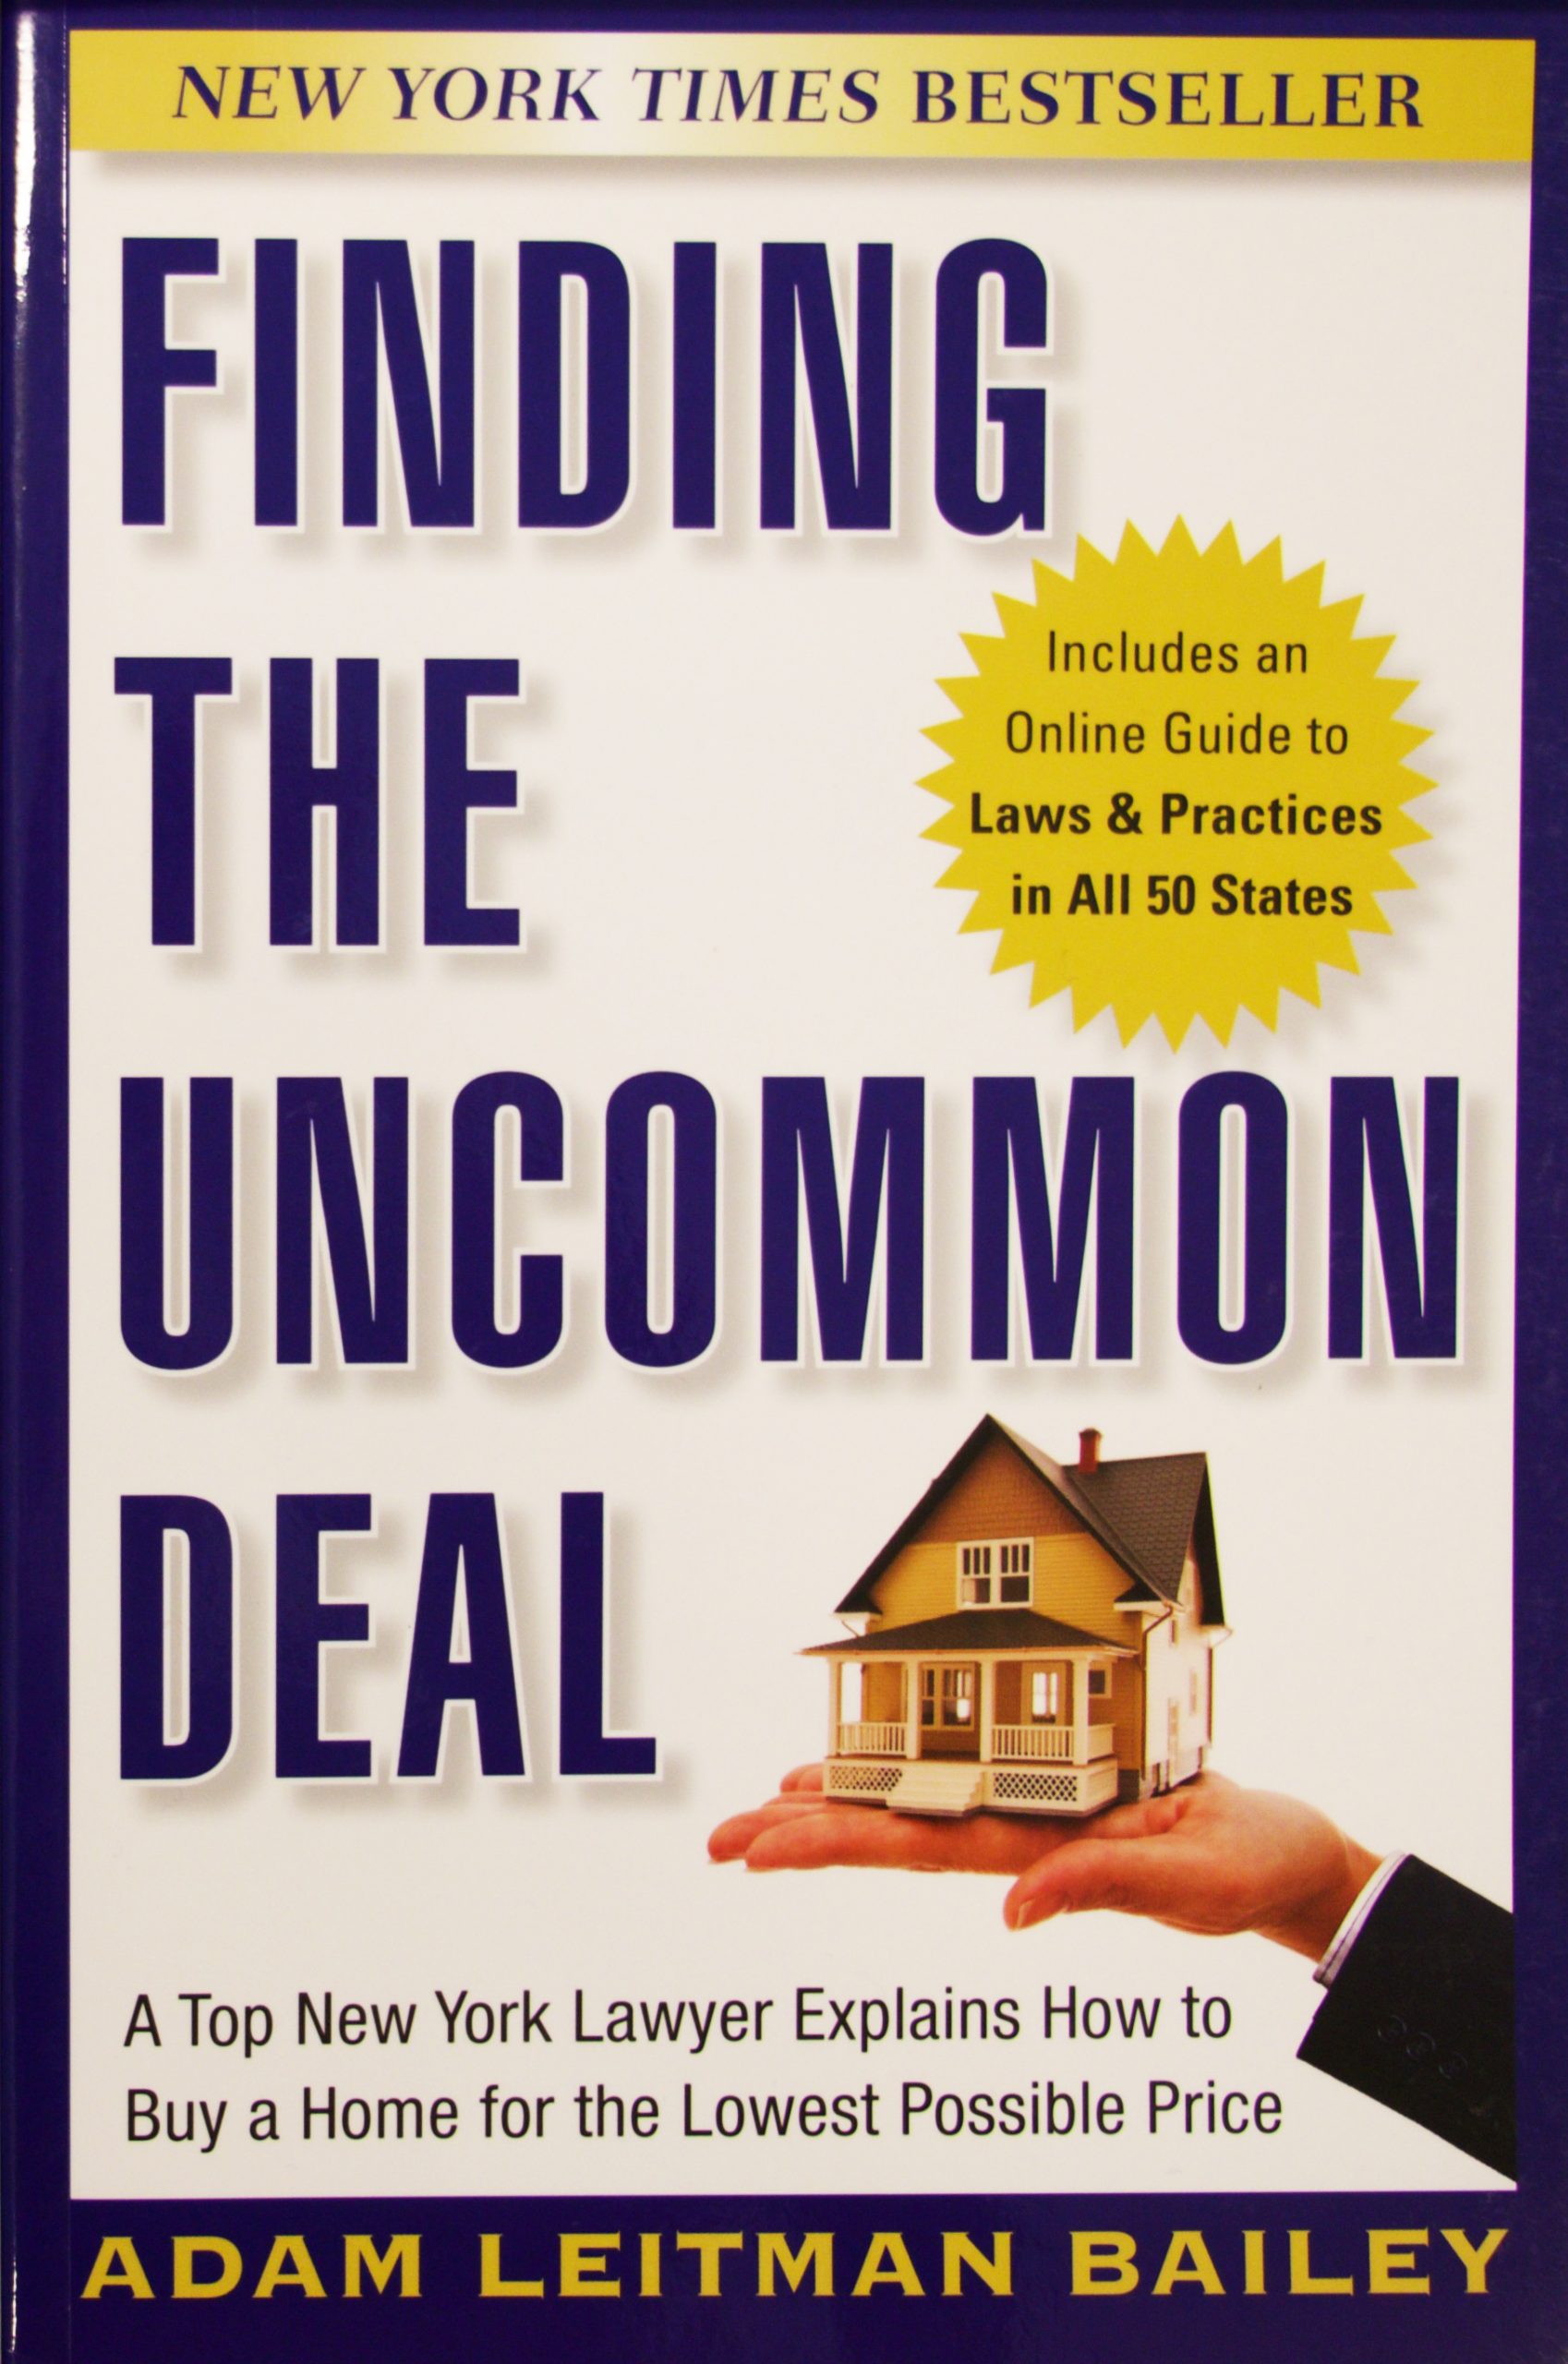 Adam Leitman Bailey Authors Finding The Uncommon Deal